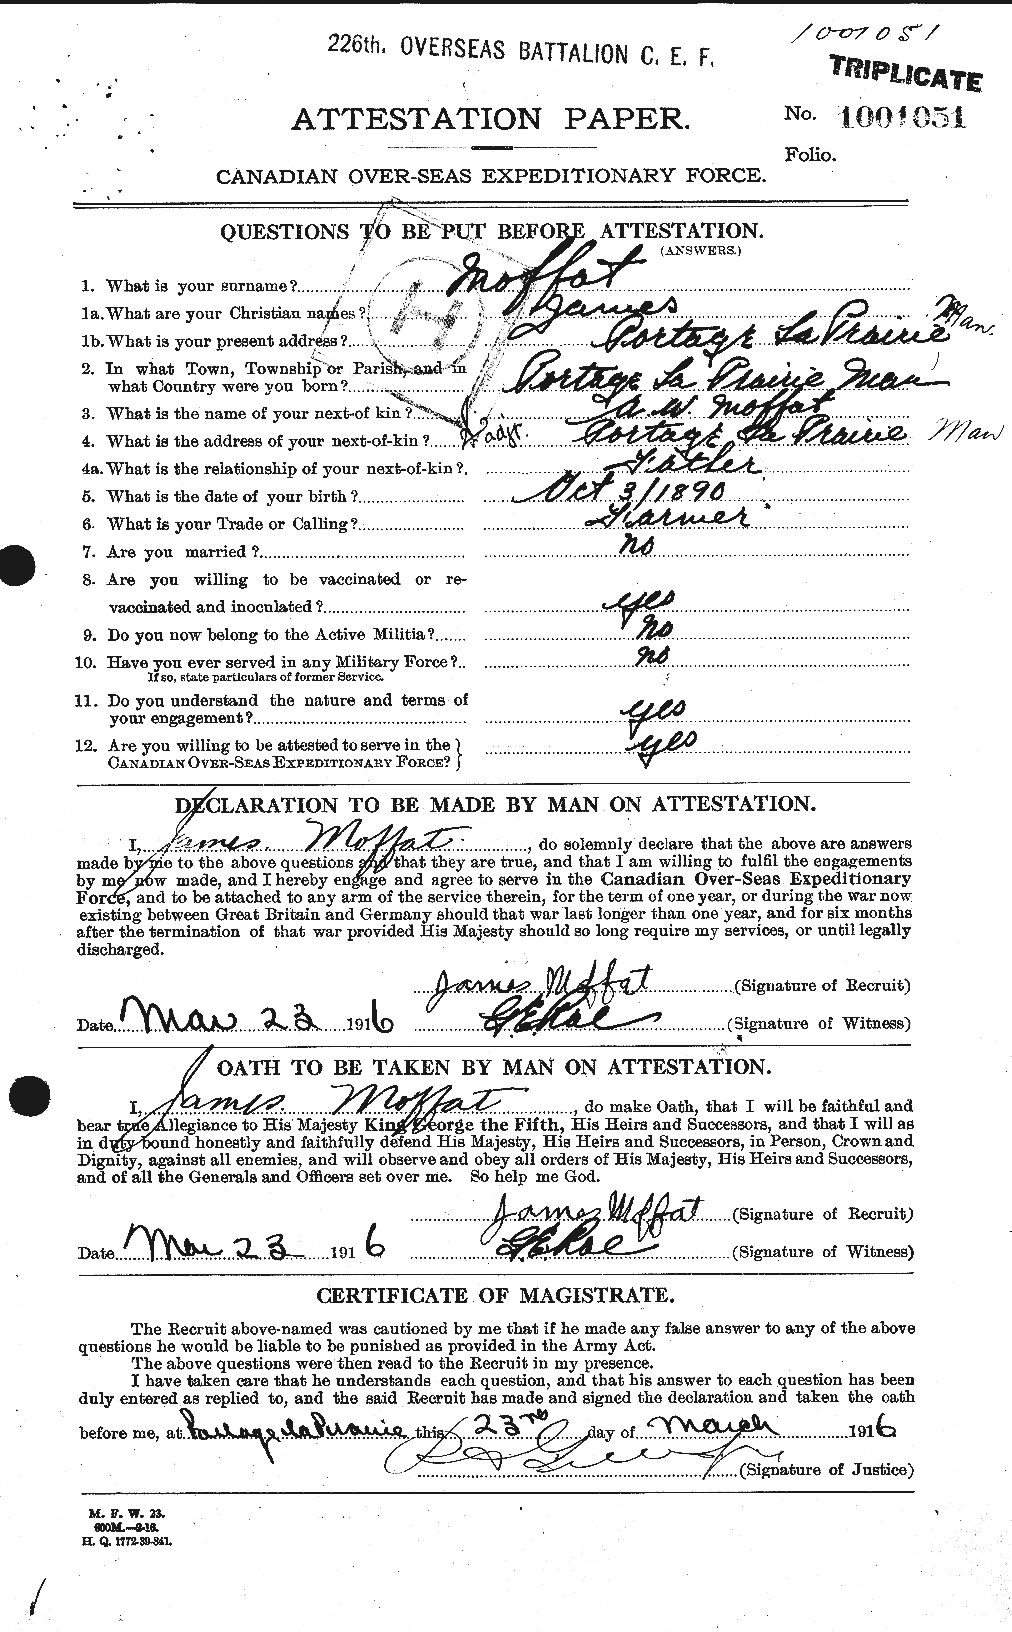 Personnel Records of the First World War - CEF 499029a